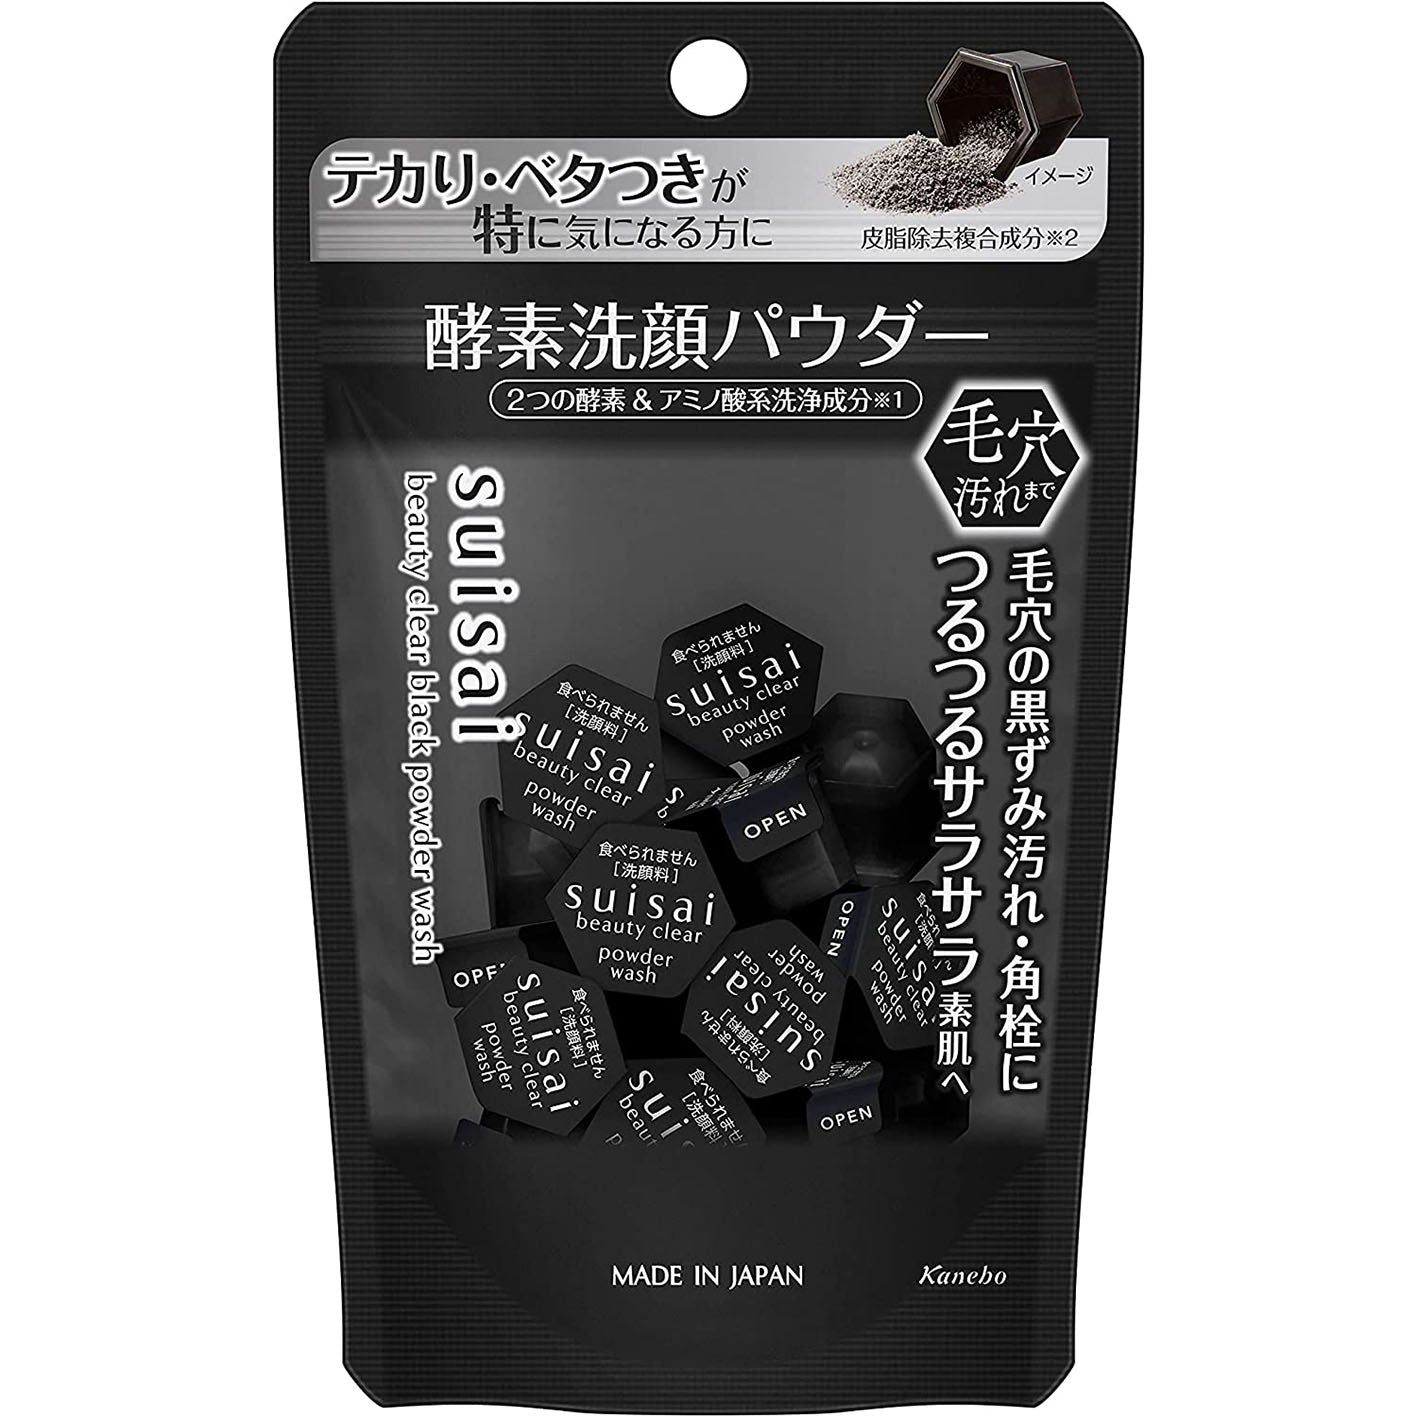 Kanebo Suisai Beauty Clear Black Face Wash Powder 0.4g -15 pieces - Harajuku Culture Japan - Japanease Products Store Beauty and Stationery